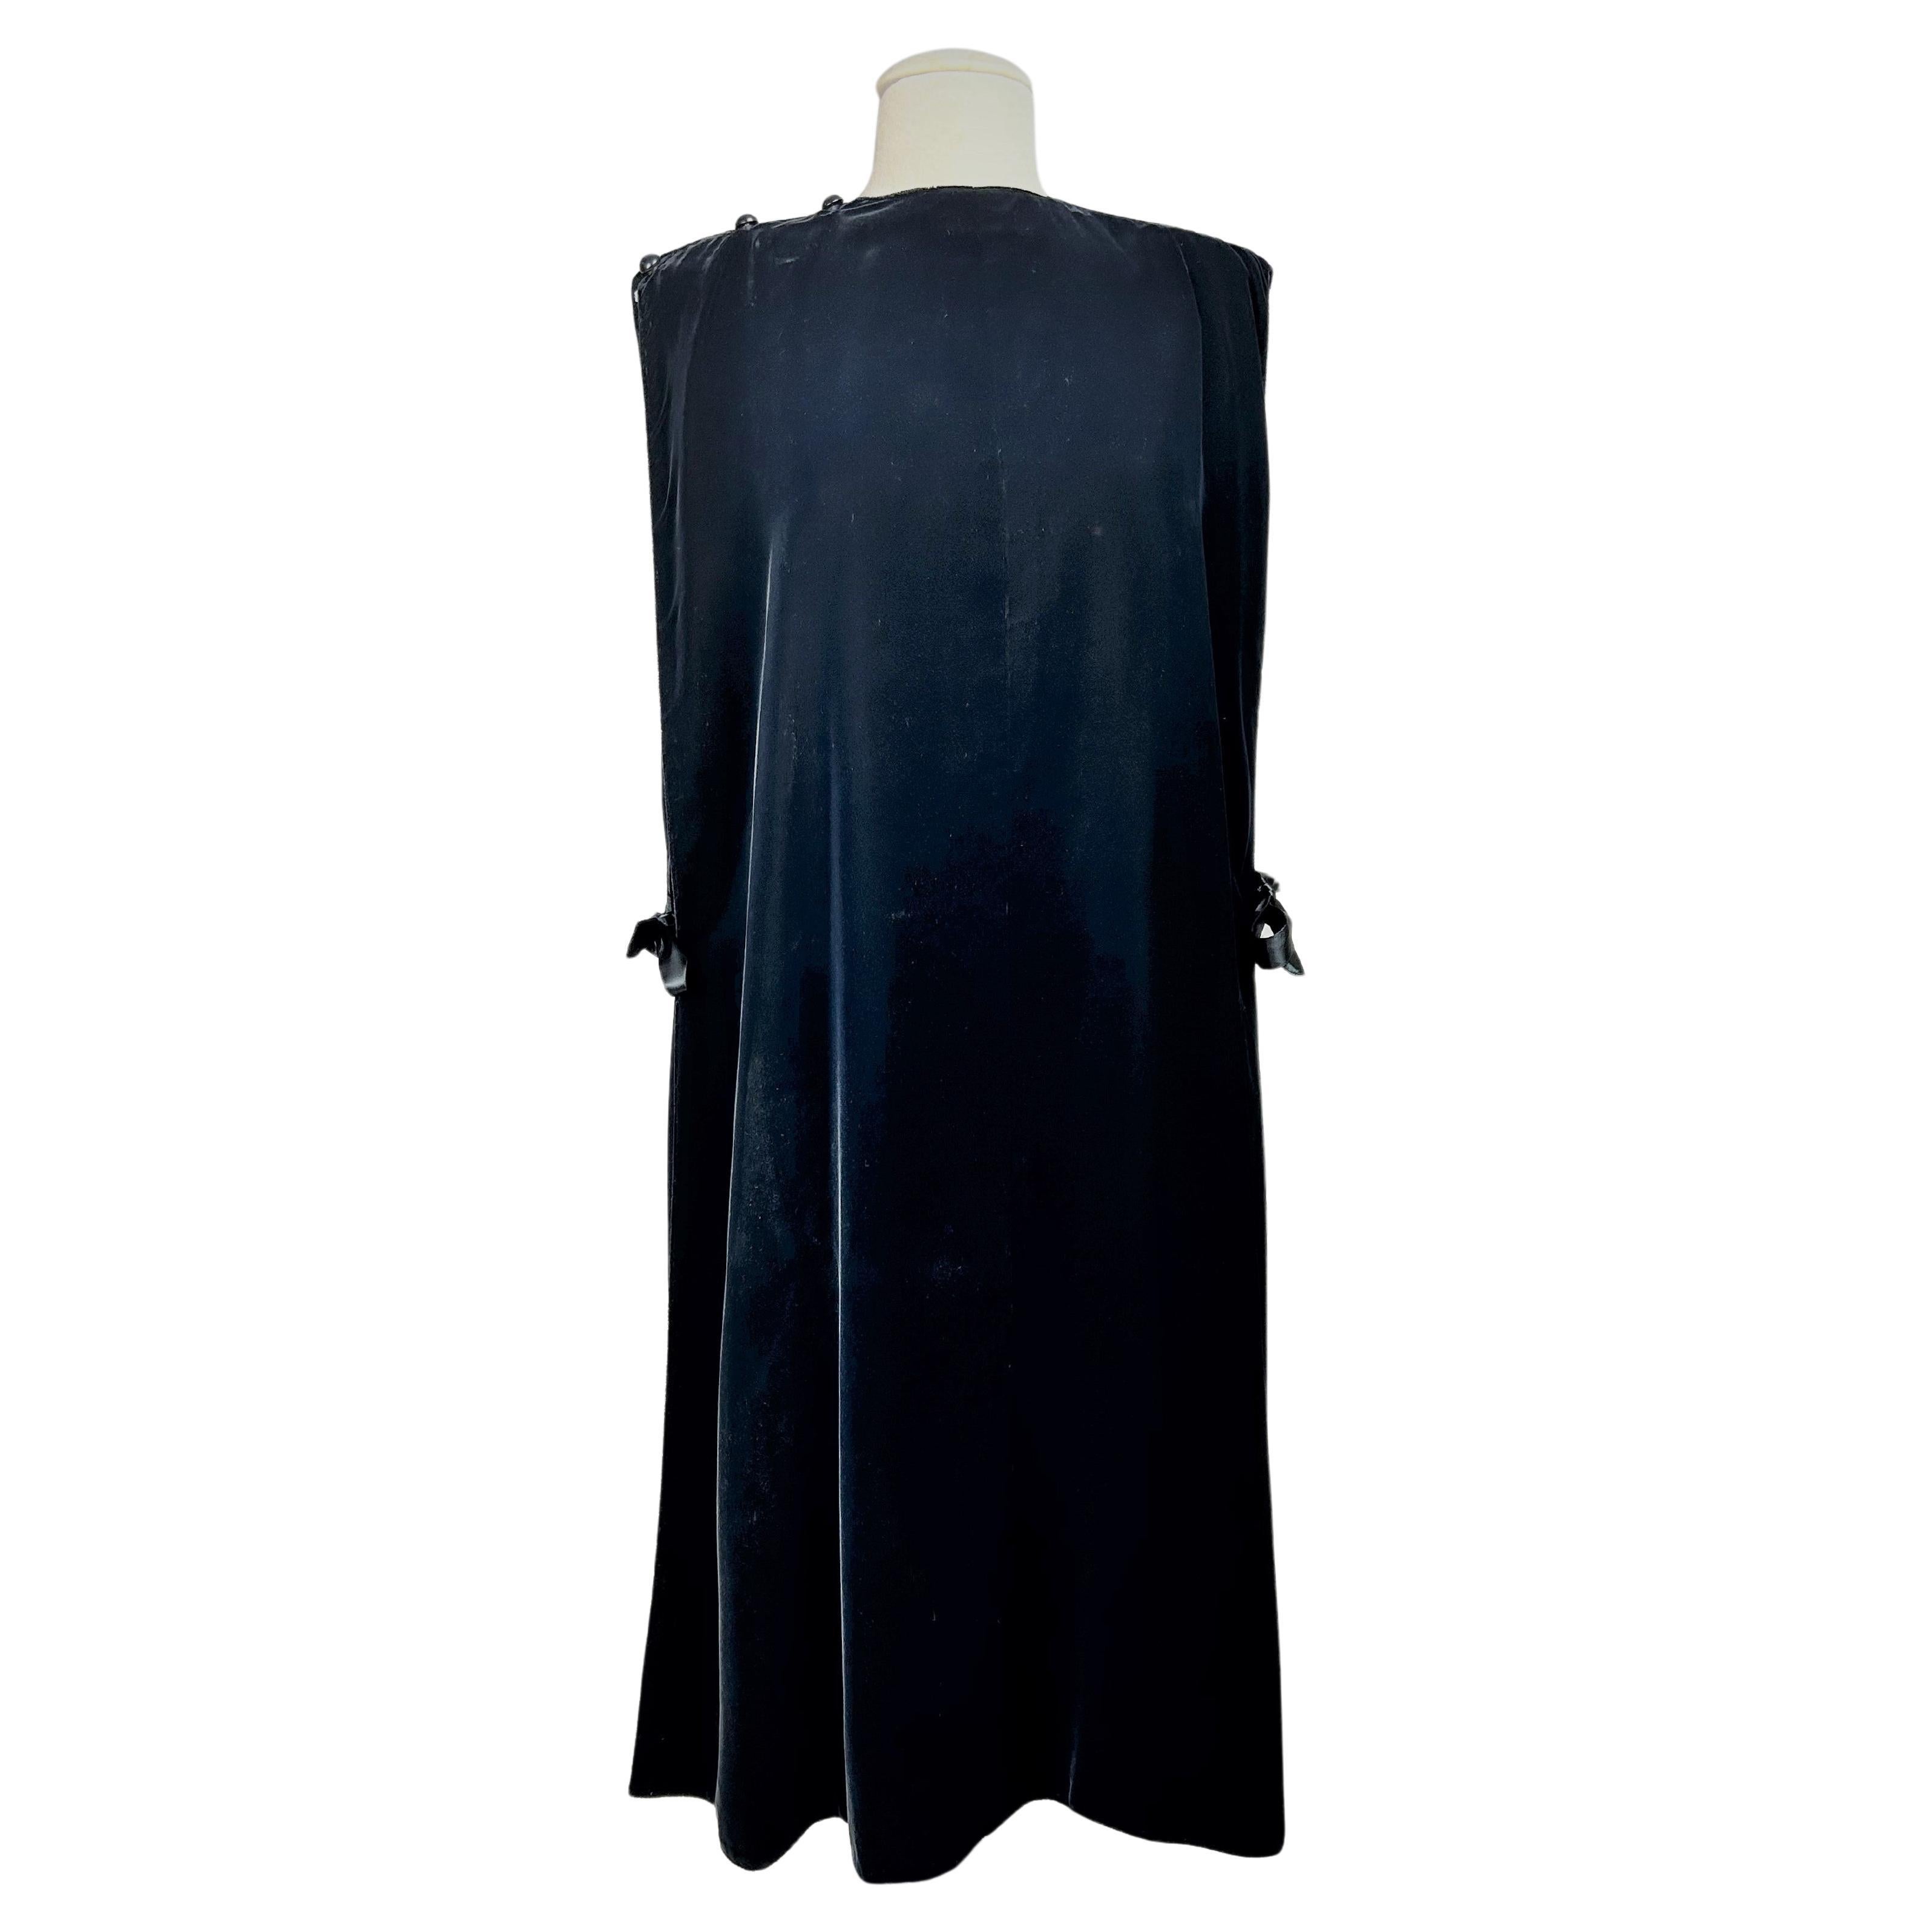 Circa 1980

France

Elegant black silk velvet Chasuble evening dress by Madame Grès Haute Couture (attributed to) dating from the 1980s. Minimalist Chasuble cut with two large triangular panels buttoned at one shoulder. The black cut silk velvet